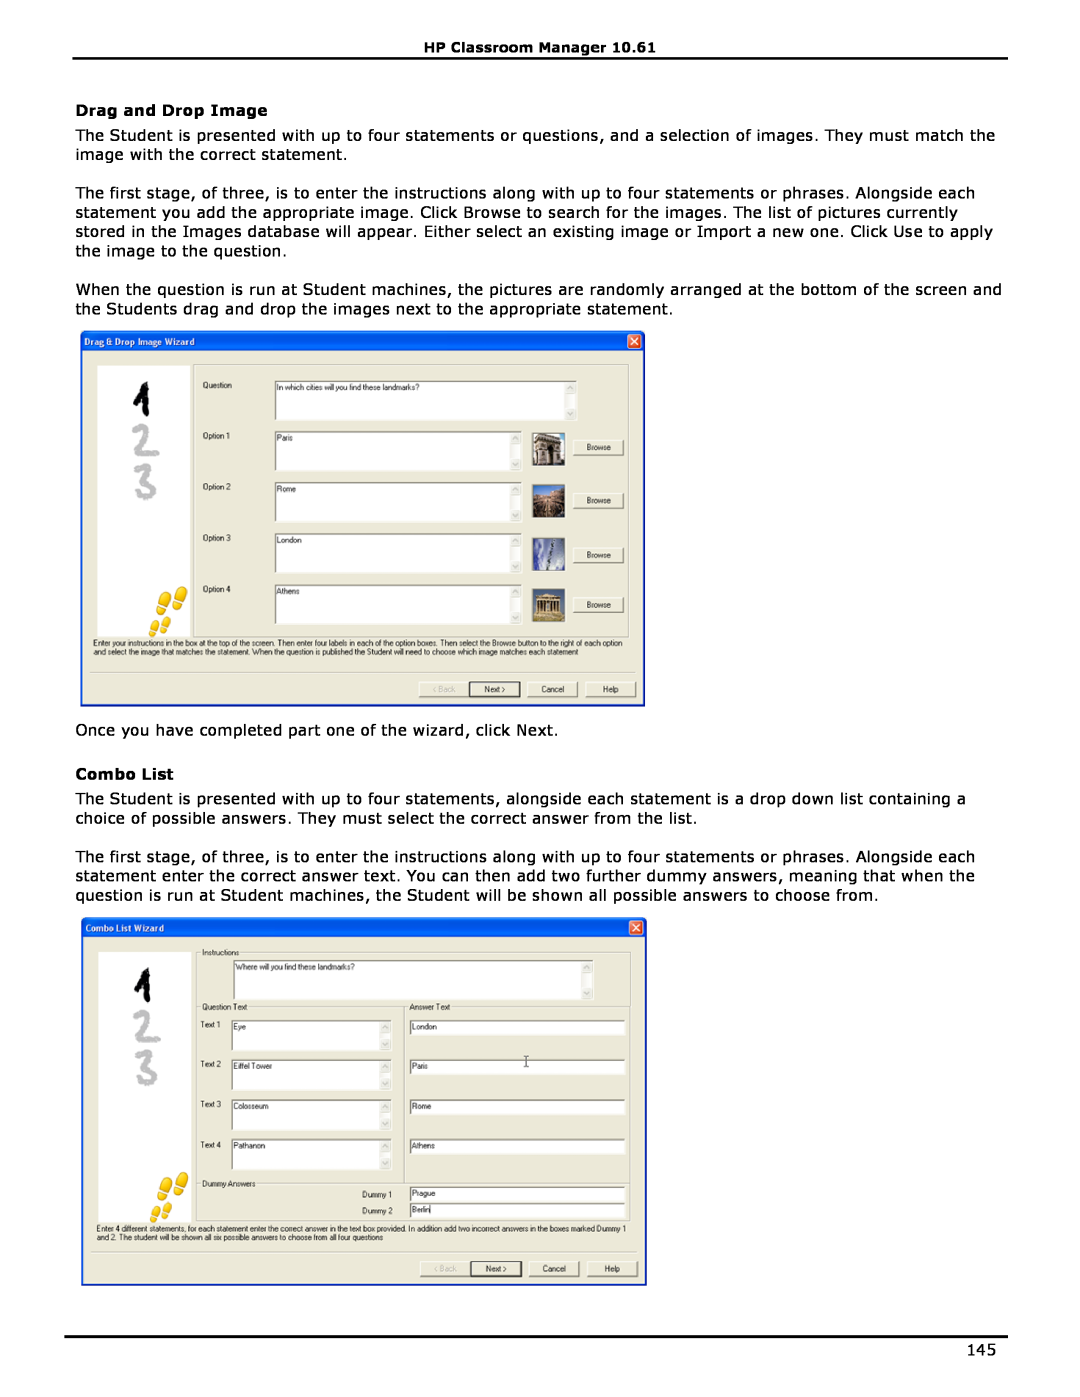 HP Classroom Manager manual Drag and Drop Image, Combo List 